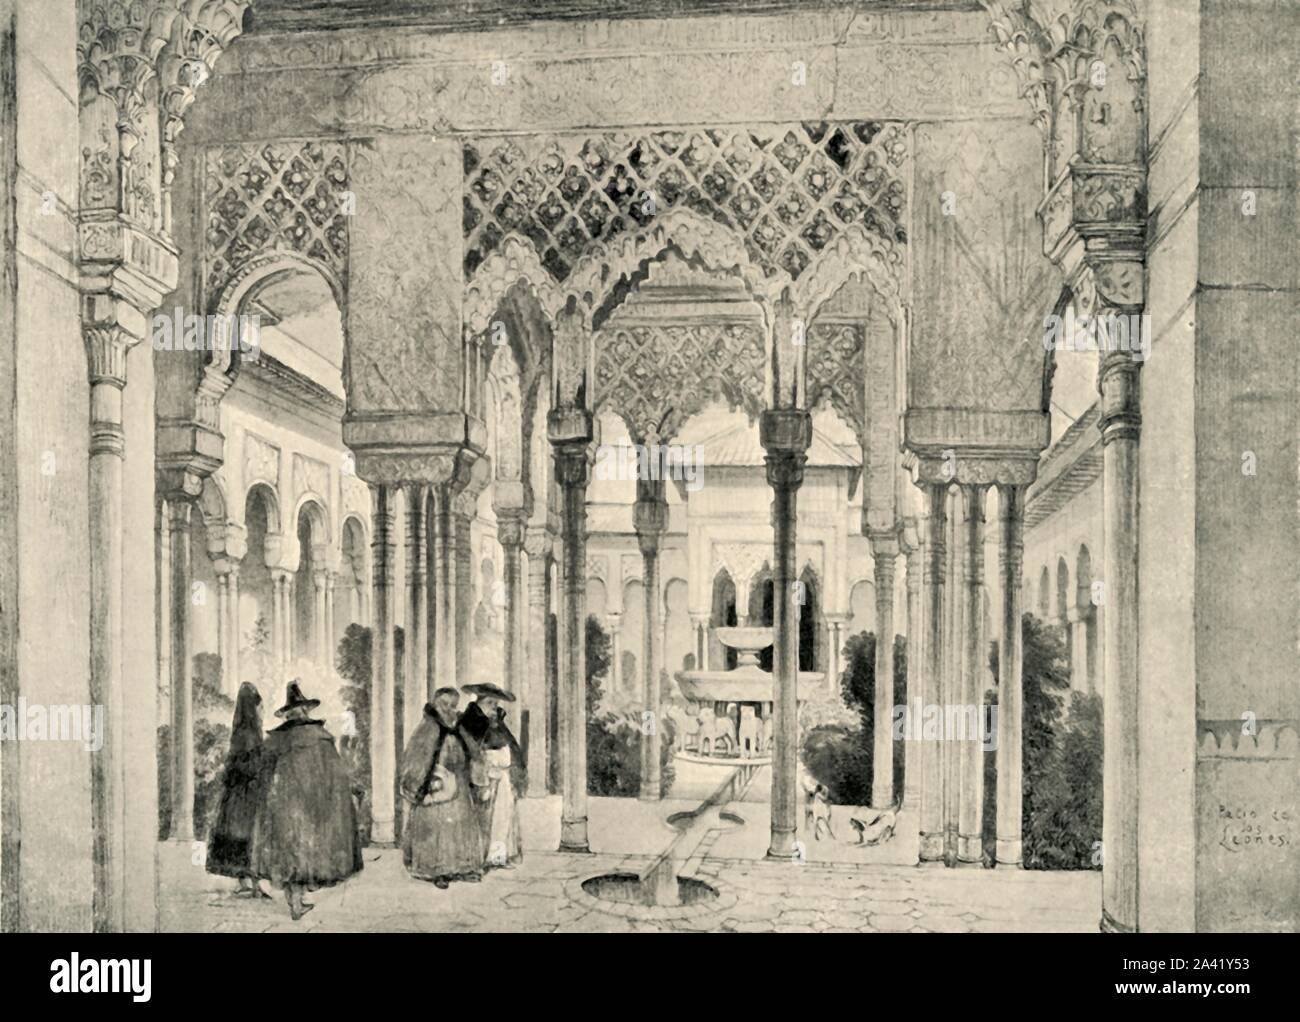 'Entrance to the Court of the Lions', c1830, (1907). Courtyard in the palace of the Alhambra, Granada, Spain, which mainly dates from the 14th century. The white marble fountain, formed of twelve lions that throw jets of water, dates from the 11th century. From &quot;The Alhambra: being a brief record of the Arabian conquest of the Peninsula with a particular account of the Mohammedan architecture and decoration&quot; by Albert F. Calvert. [John Lane, London &amp; New York, 1907] Stock Photo